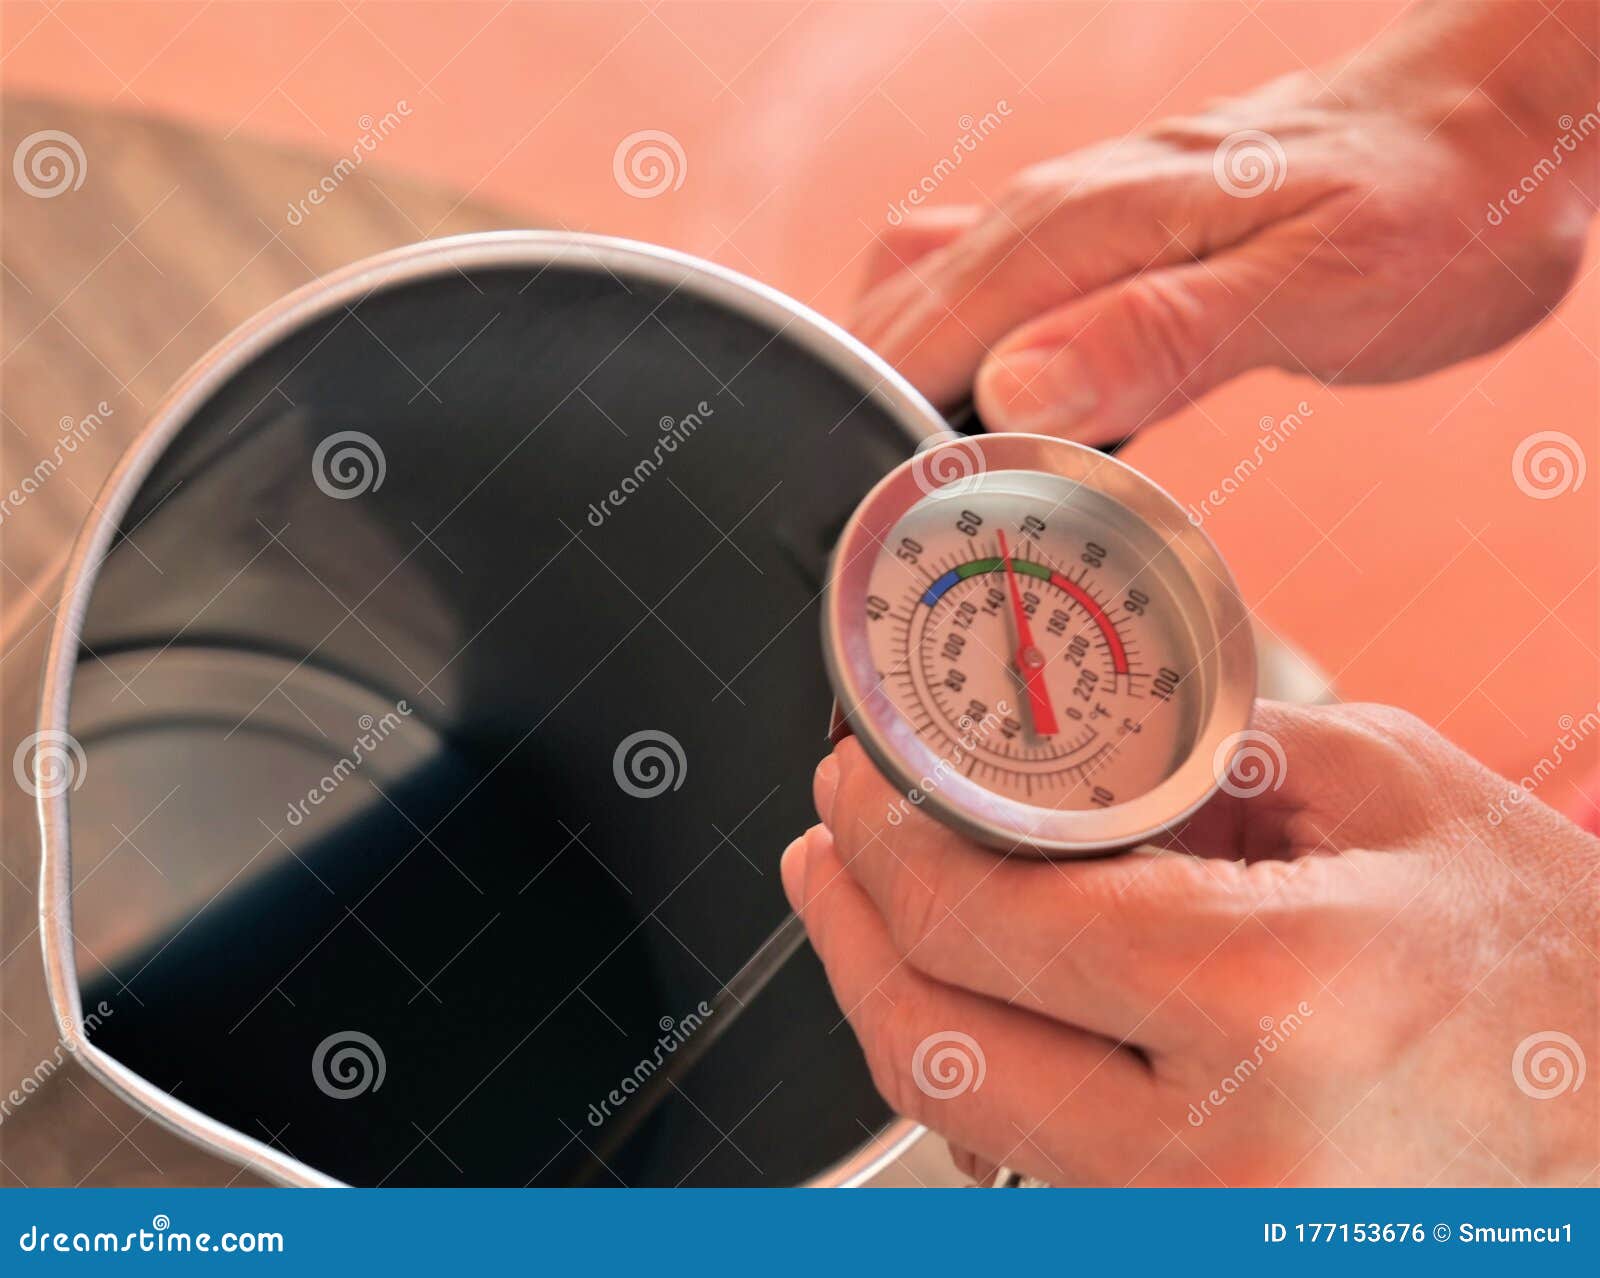 https://thumbs.dreamstime.com/z/measuring-wax-temperature-hand-holding-thermometer-to-measure-making-candles-177153676.jpg